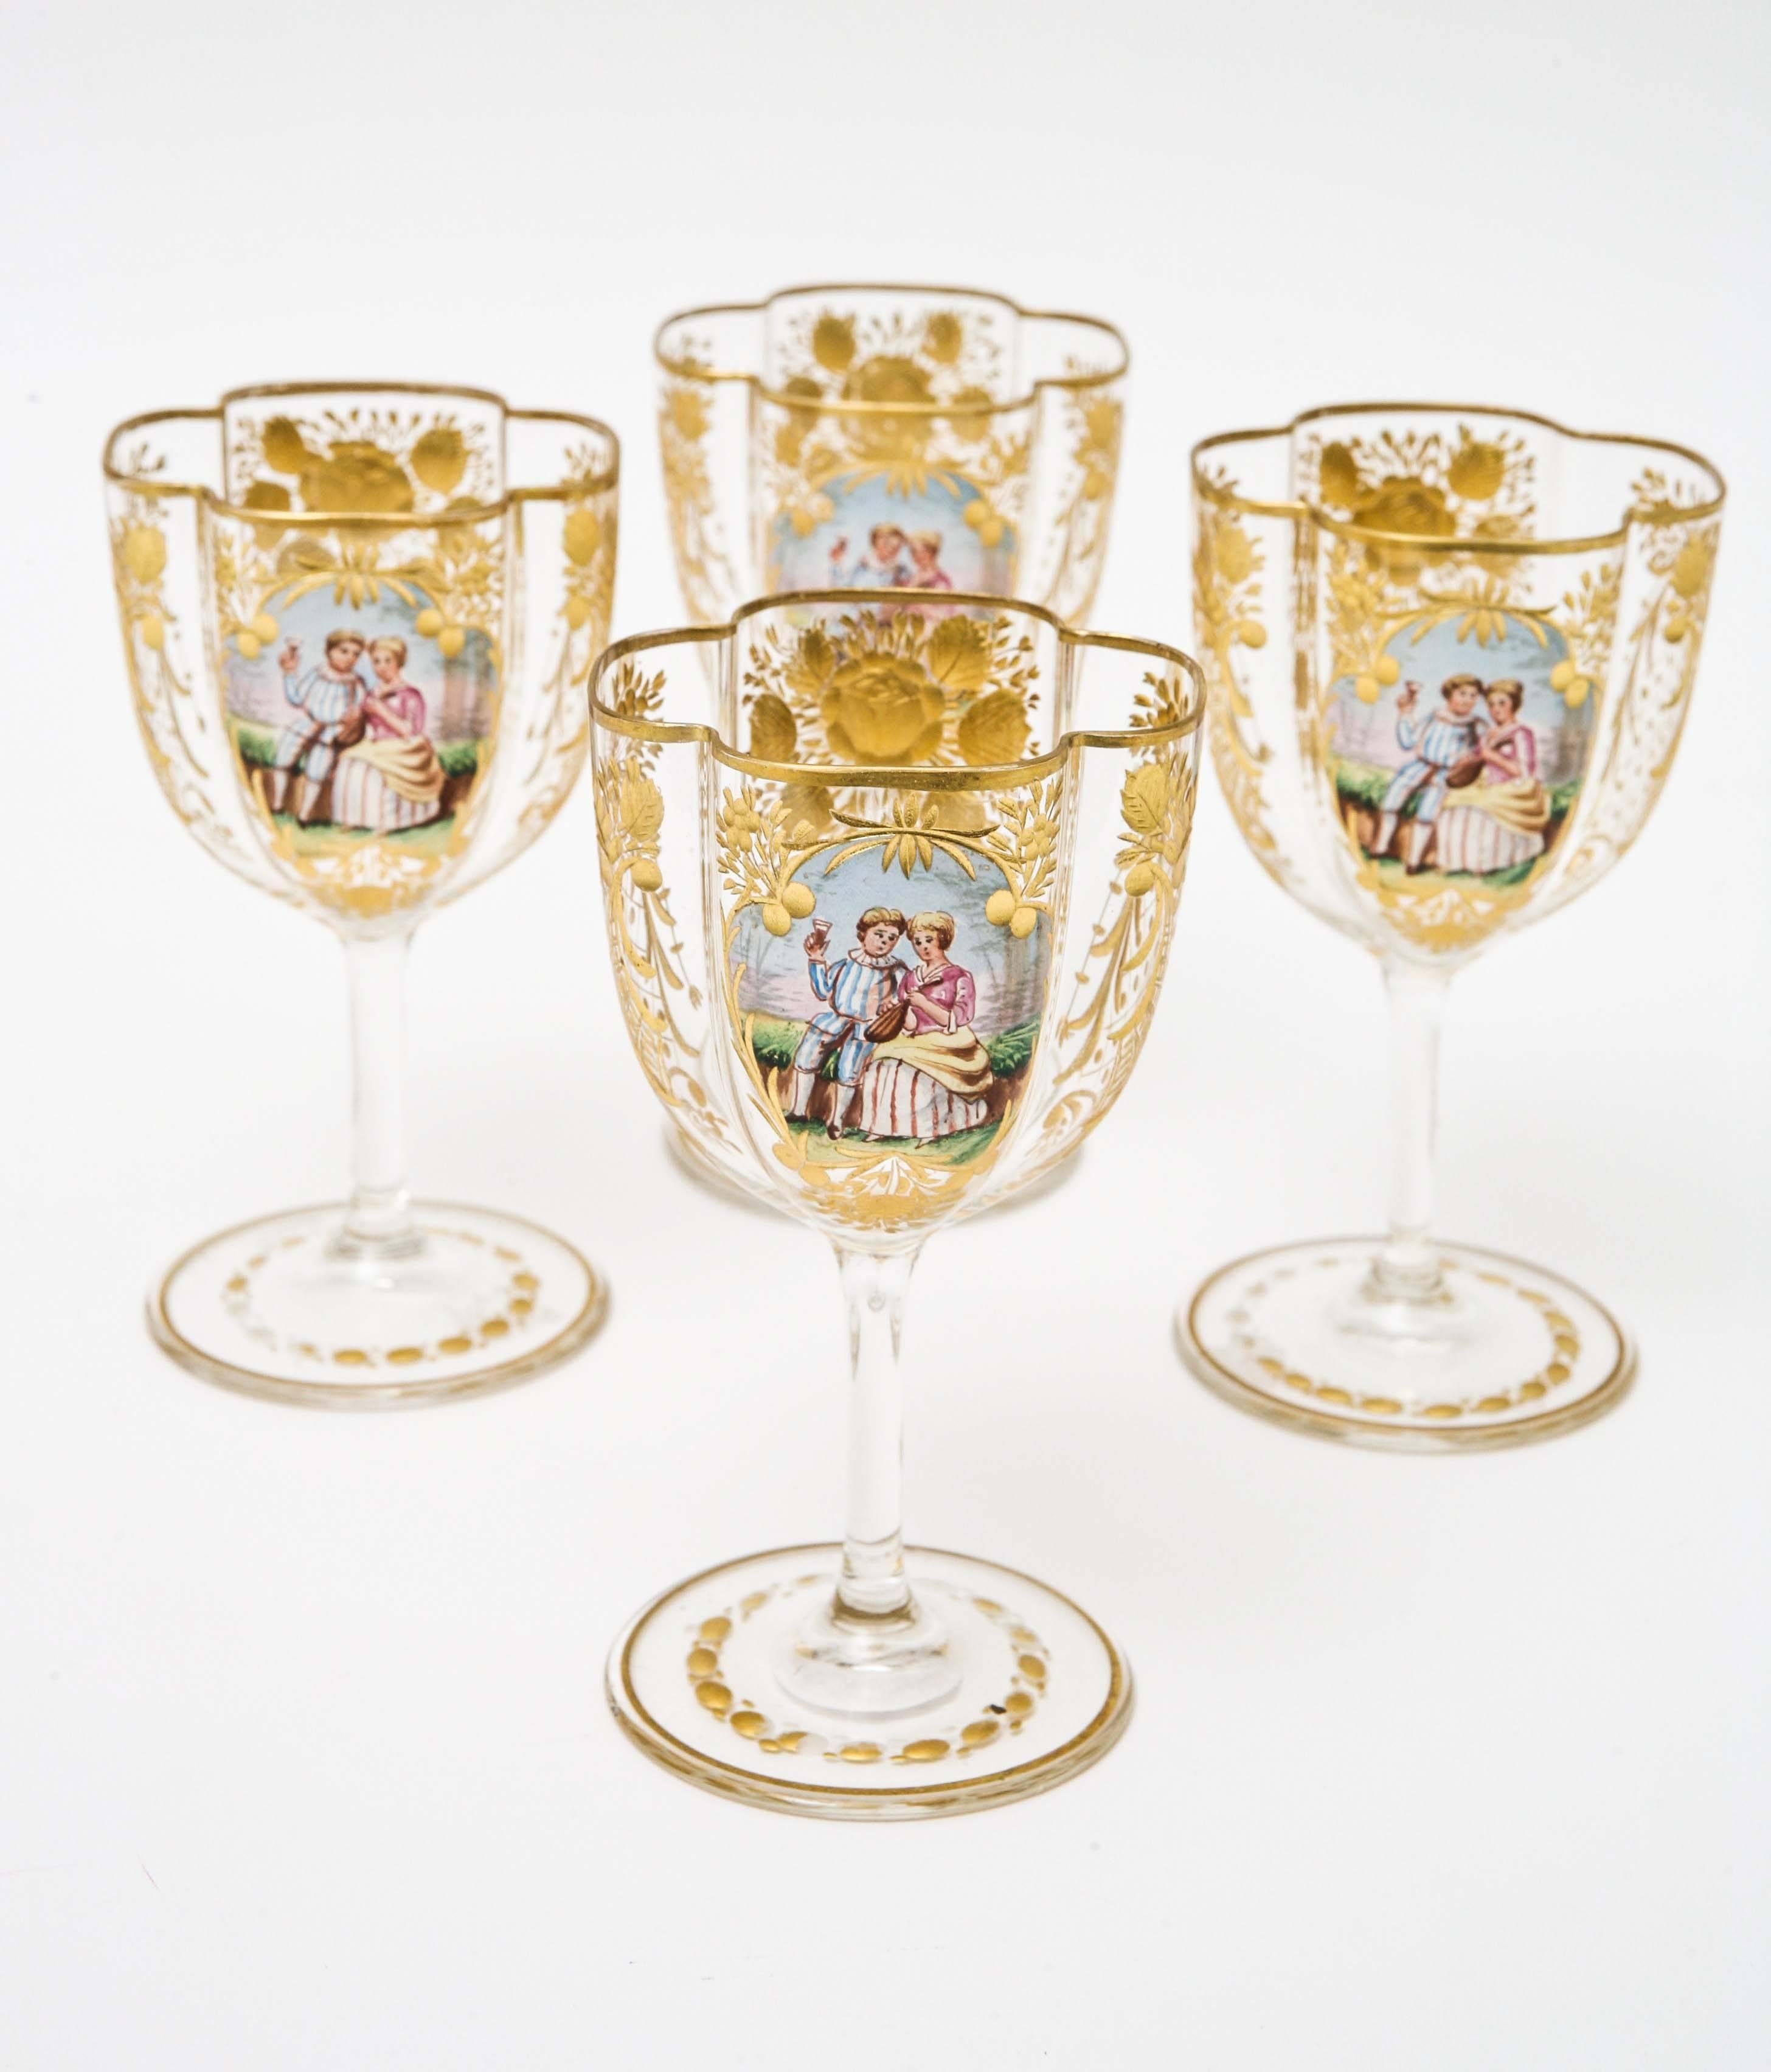 A delightful and elegant set of four sherry or petite wine glasses that match the six champagne coupes we just put on. Beautiful hand-cut and gilded foliate decoration and a cartouche of a romantic seen adds to the charm of these. In wonderful